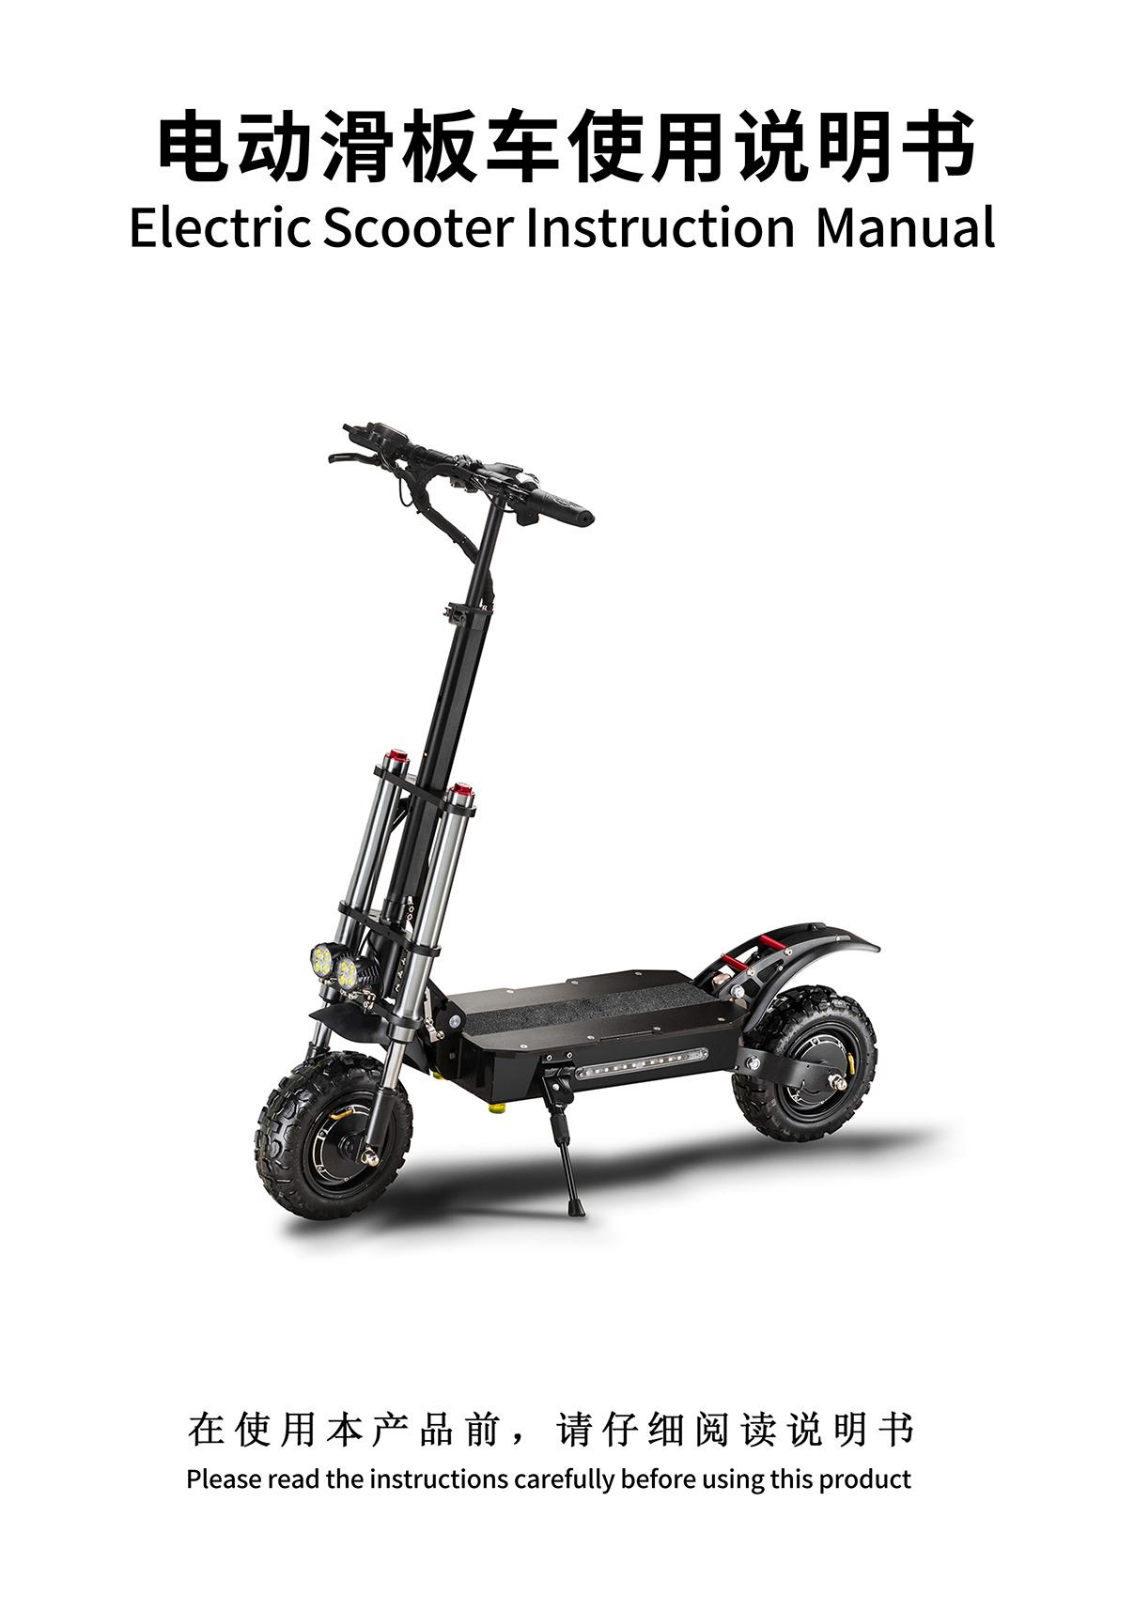 Boyueda Electric Scooter Instruction Manual